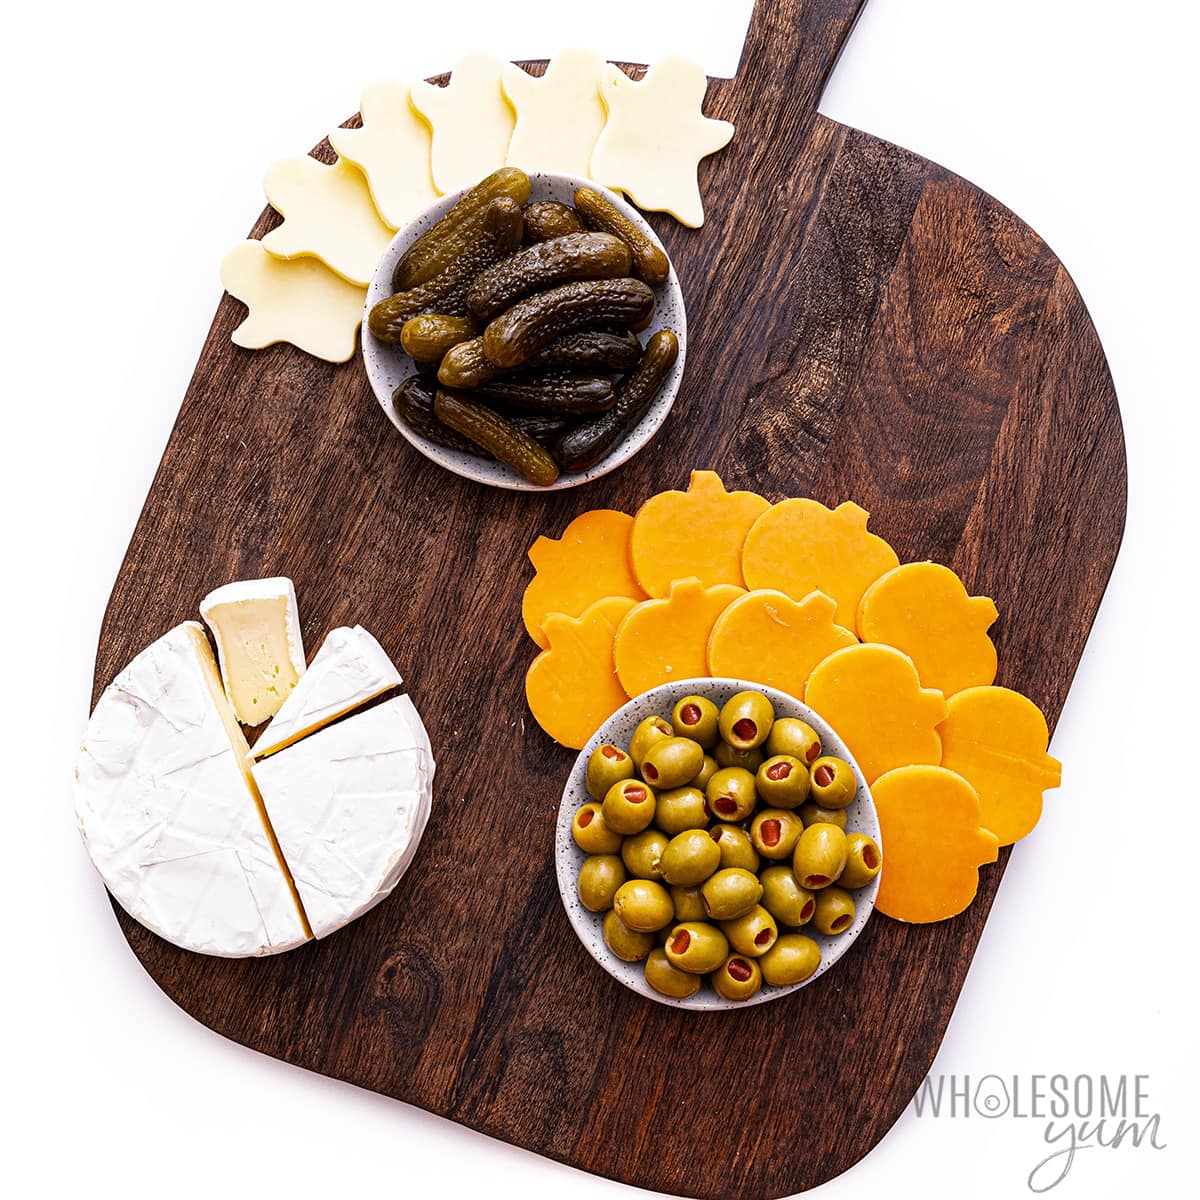 Cheese, olives and pickles are placed on the plate.